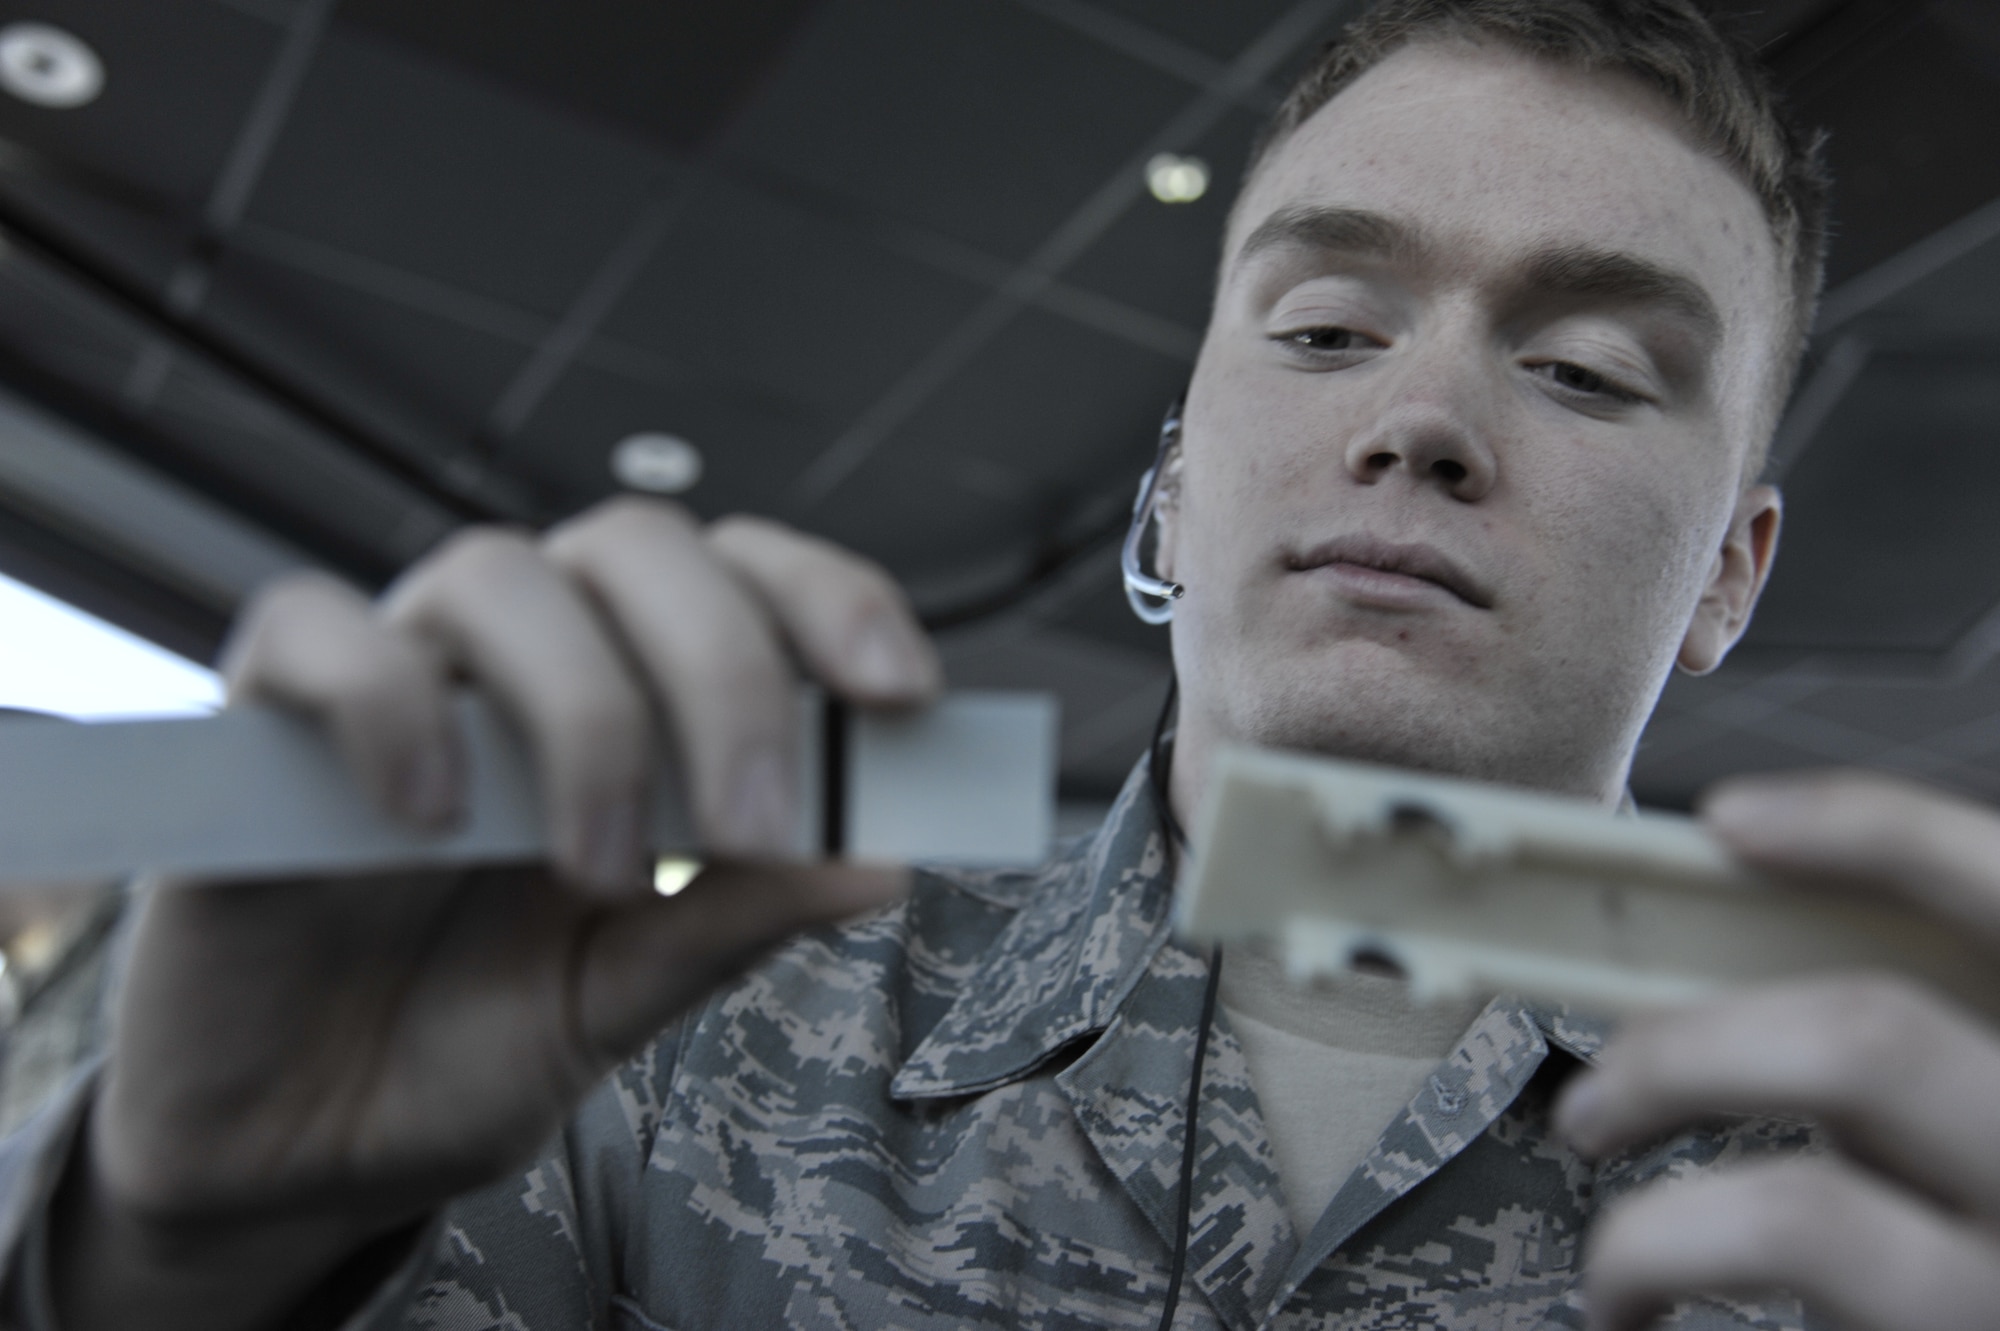 Airman 1st Class Seth Lewis, 509th Operations Support Squadron air traffic control apprentice, slides a flight strip into a holder at Whiteman Air Force Base, Mo., March 11, 2013. A flight strip is used for flight planning to tell route of flight. It also tracks the arrival and departure times. (U.S. Air Force photo by Airman 1st Class Keenan Berry/Released) 